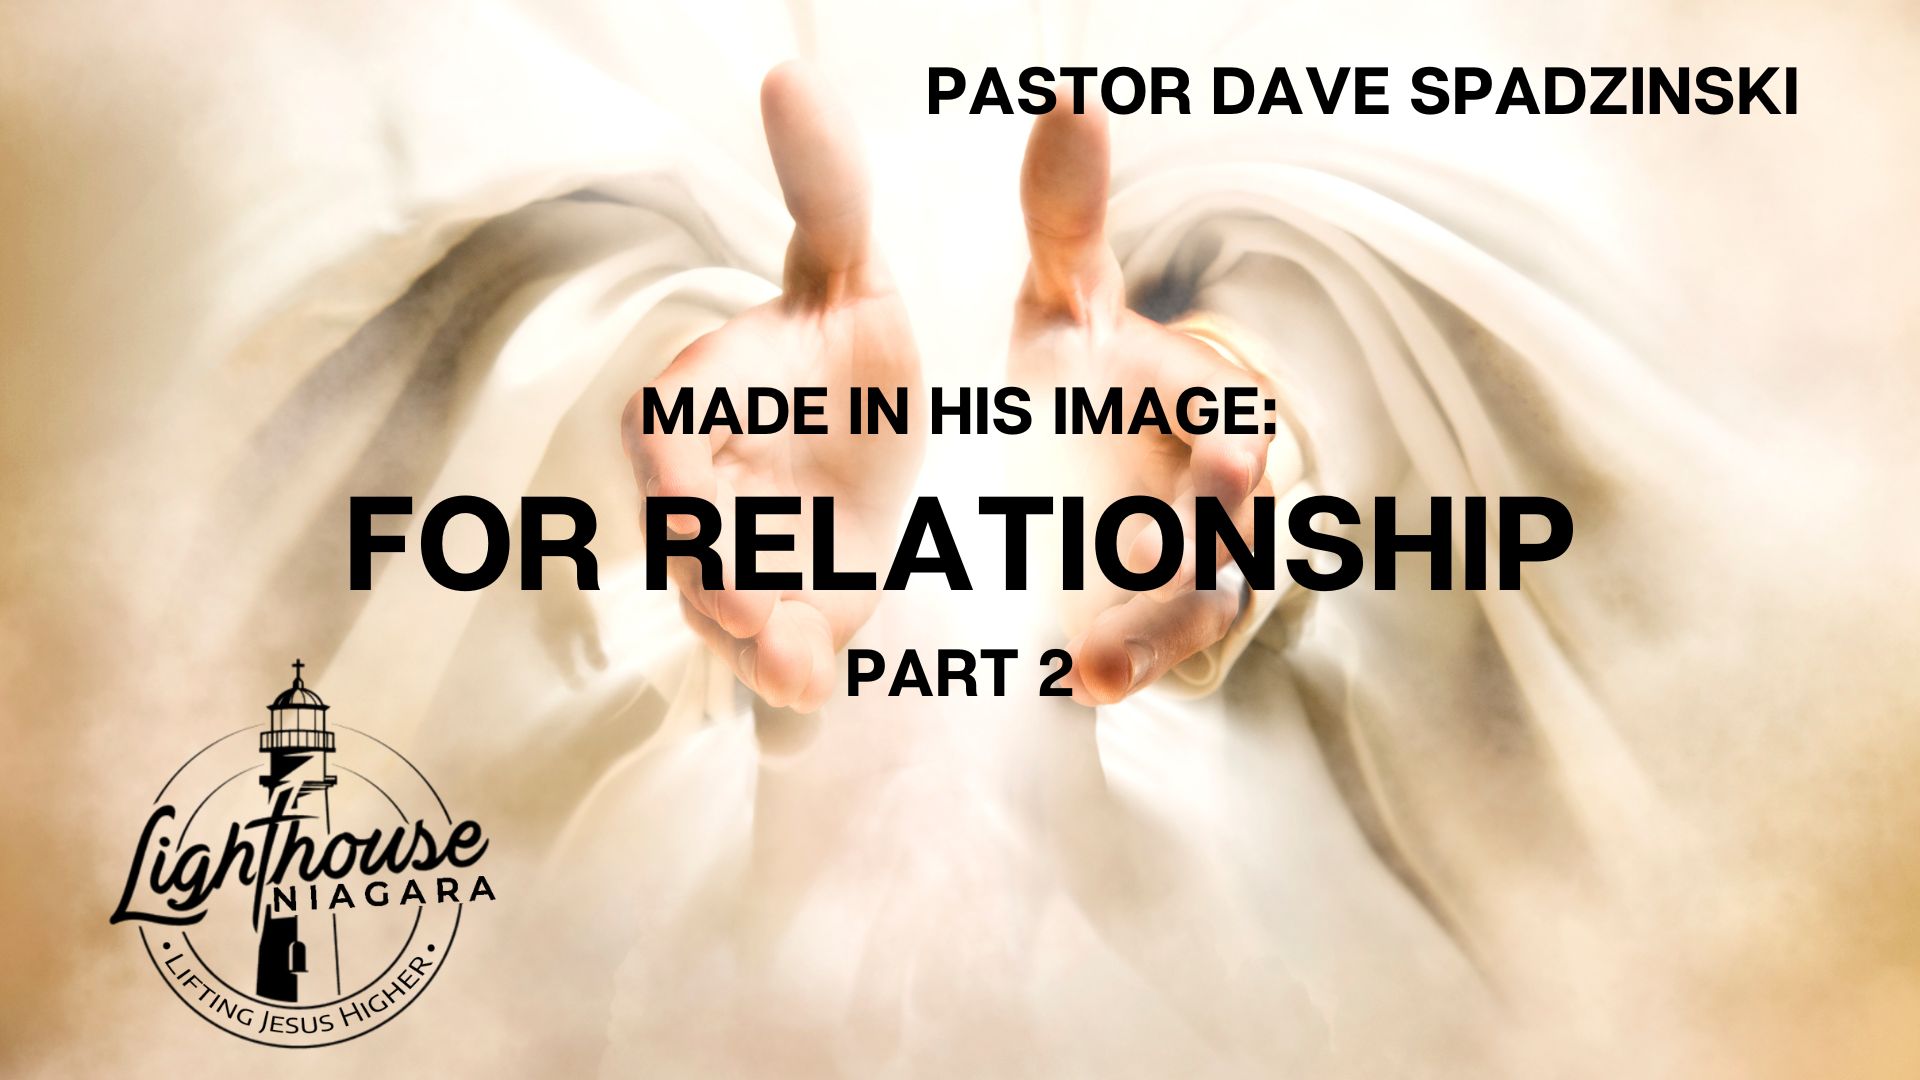 Made In His Image: For Relationship - Pastor Dave Spadzinski